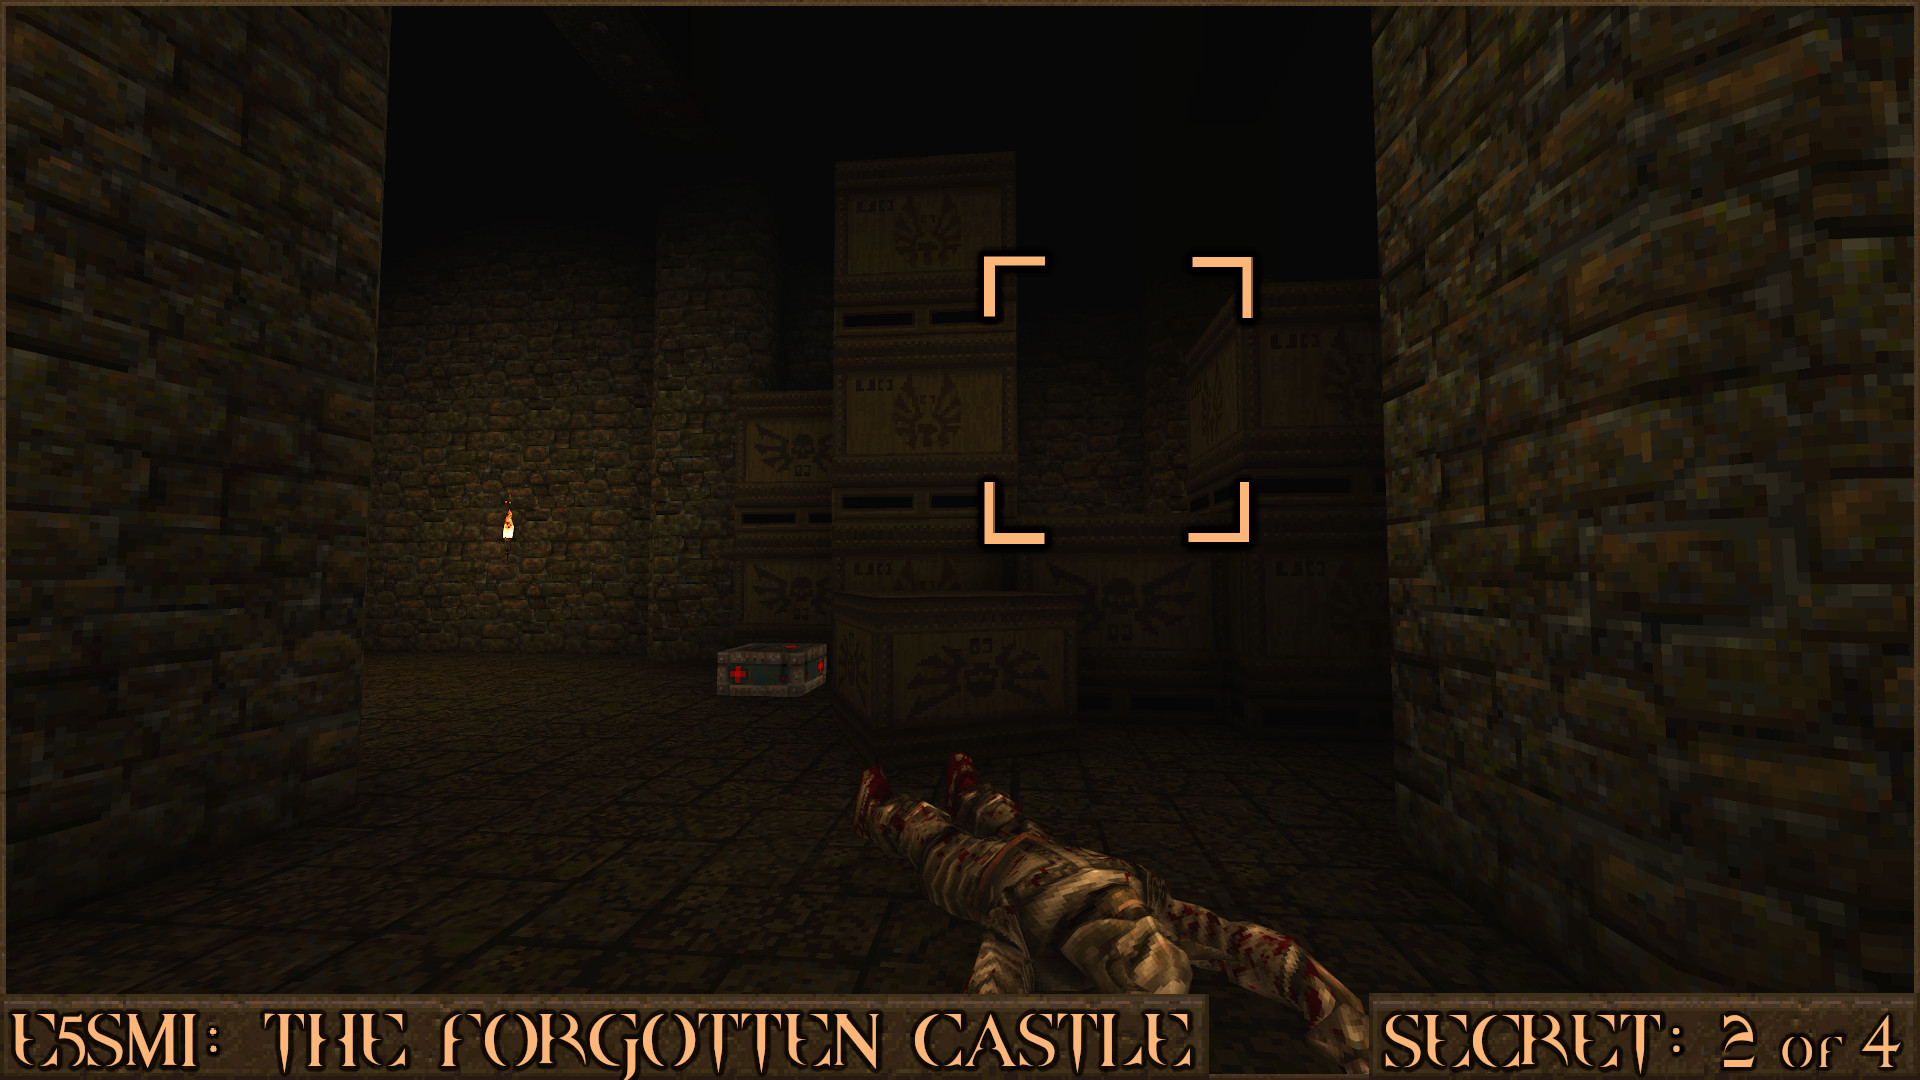 Quake Finding All Secrets in Quake Expansion pack: Dimension of the Past - E5SM1: The Forgotten Castle [Secret Level] - 506B8AE